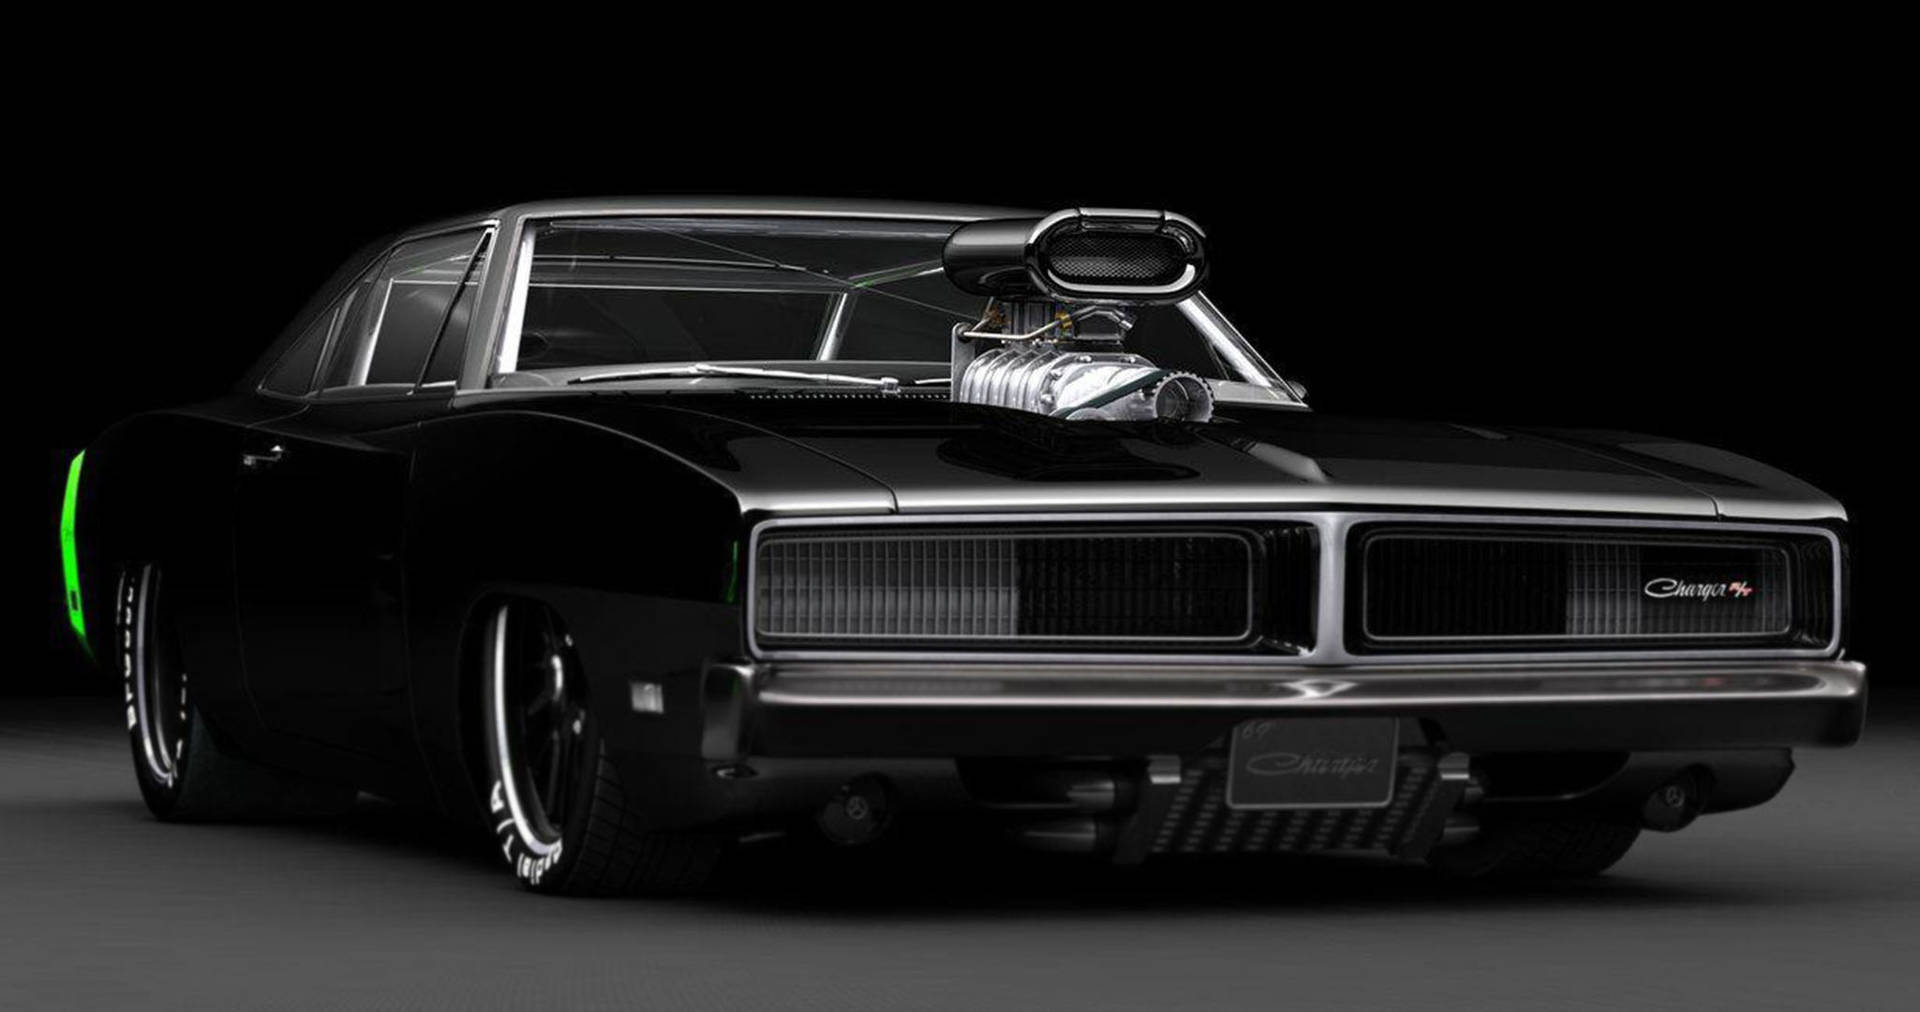 1969 Dodge Charger Blower Background